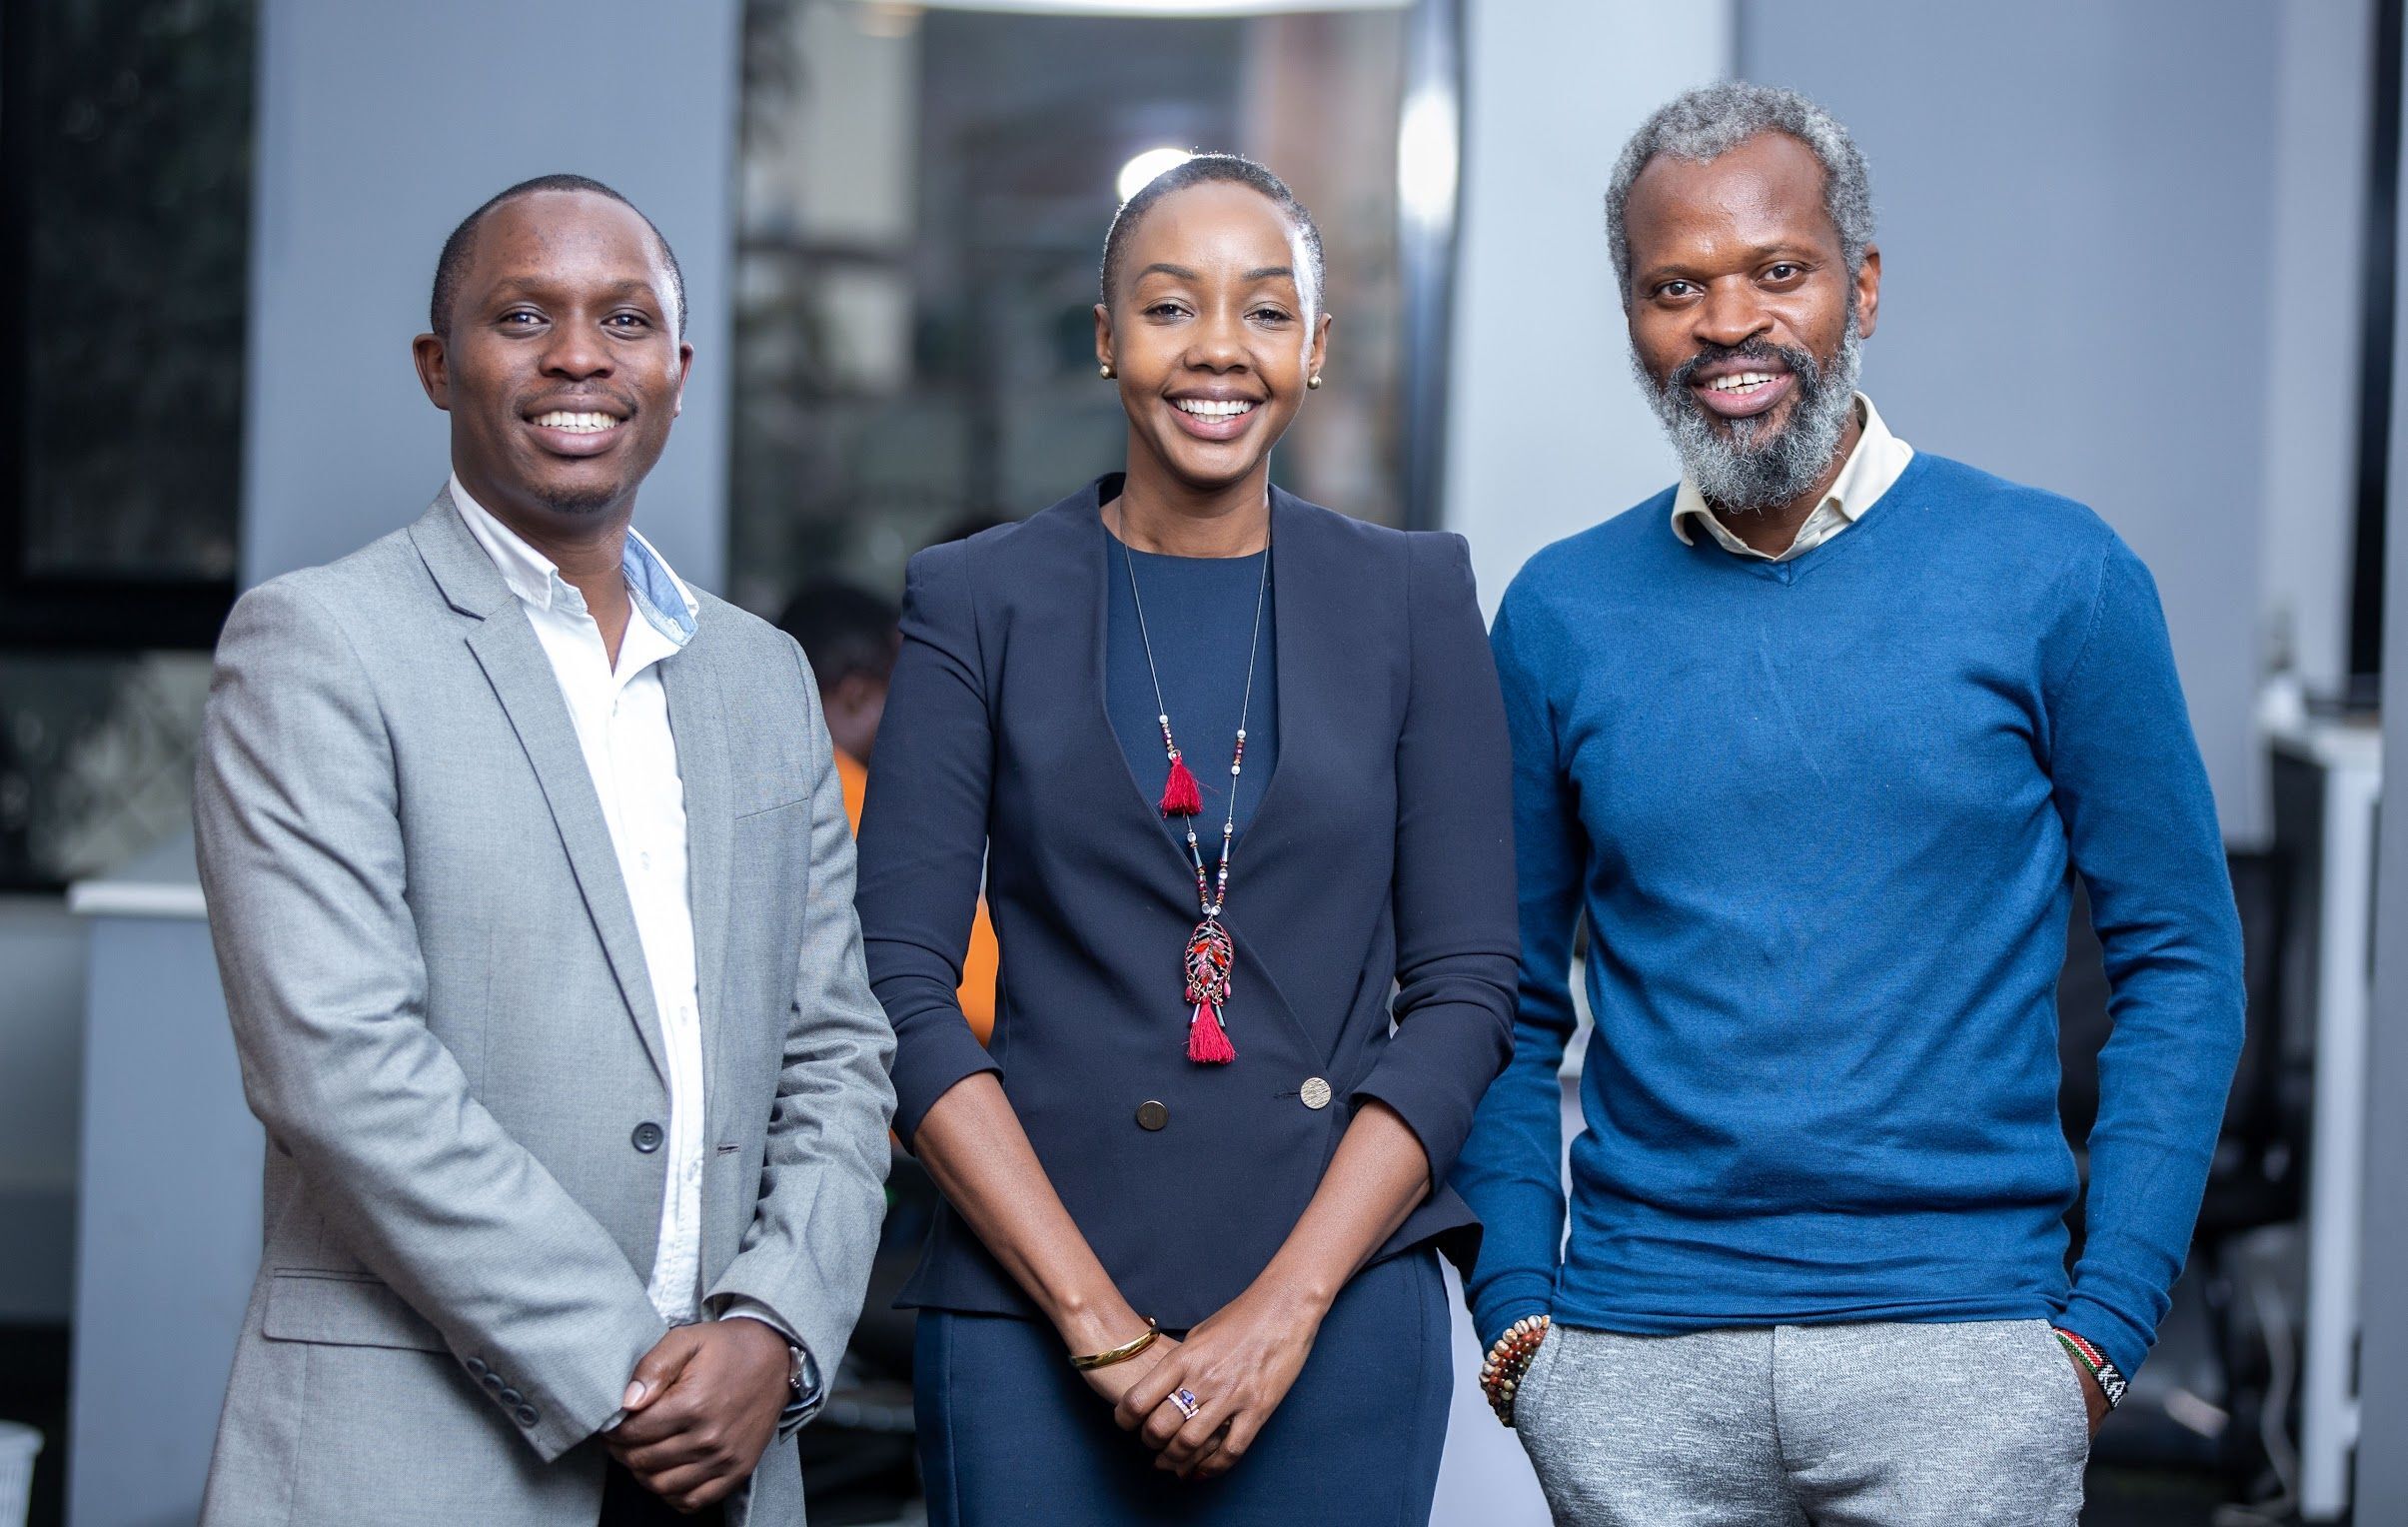 Adanian Labs partners with EMURGO Africa to scale blockchain start-ups in Africa